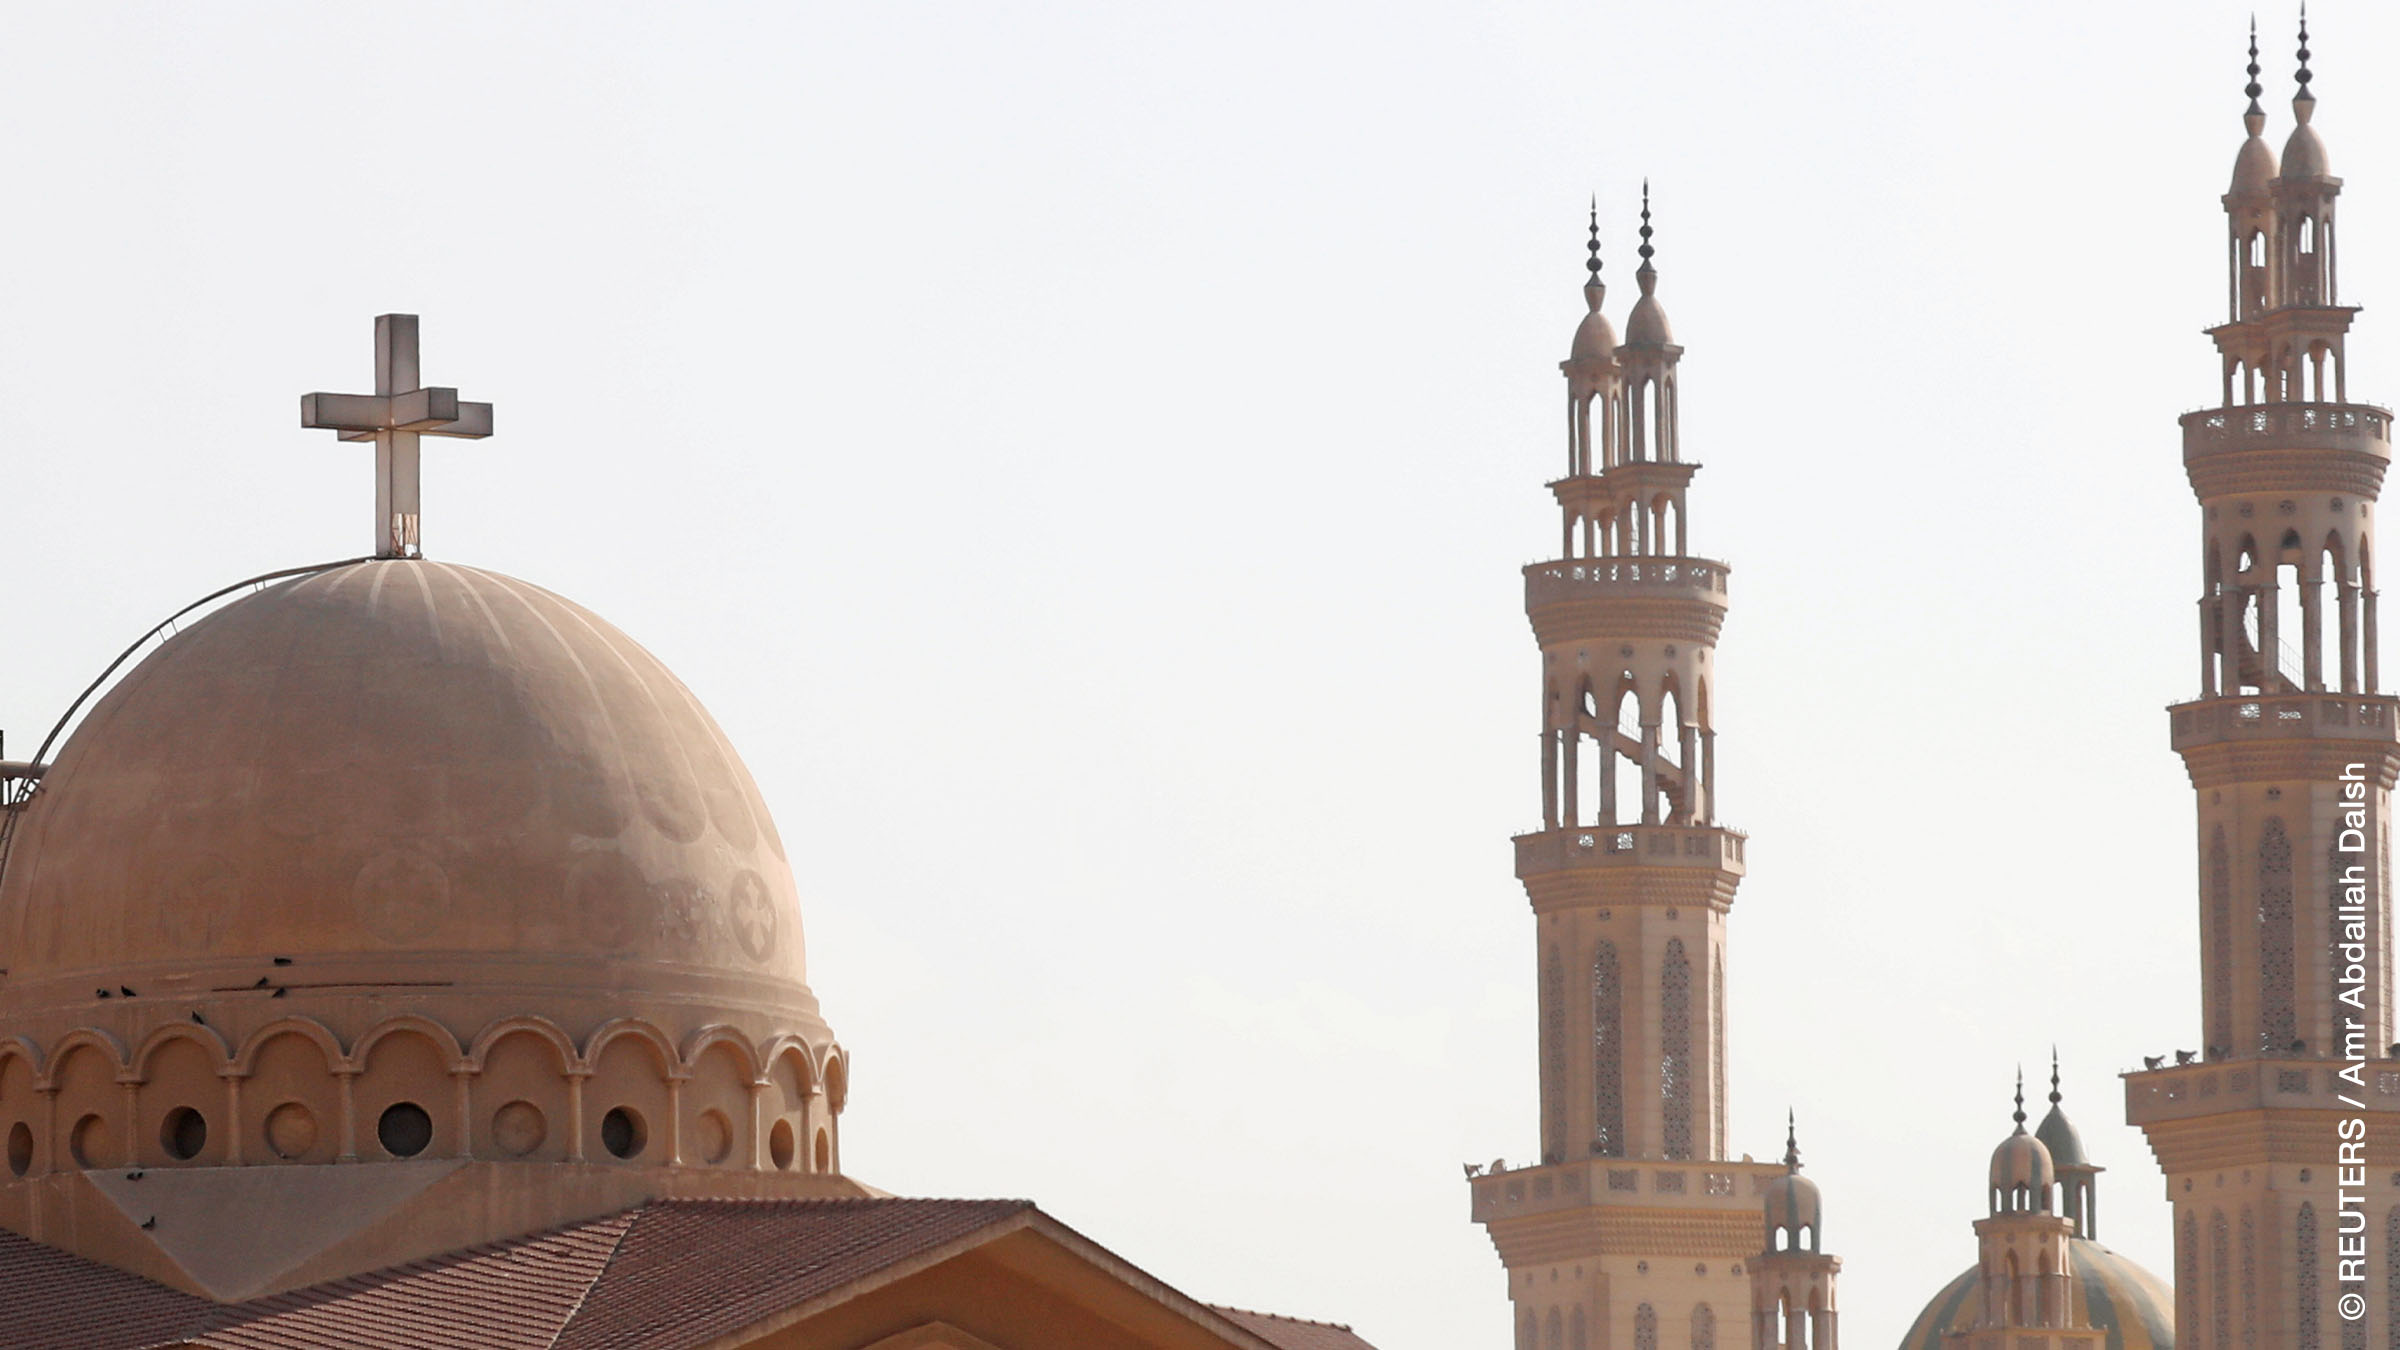 Minarets of a mosque and the cross above a church is seen during the Muslim holy fasting month of Ramadan, in the El-Marg district of Cairo, Egypt June 13, 2018. 